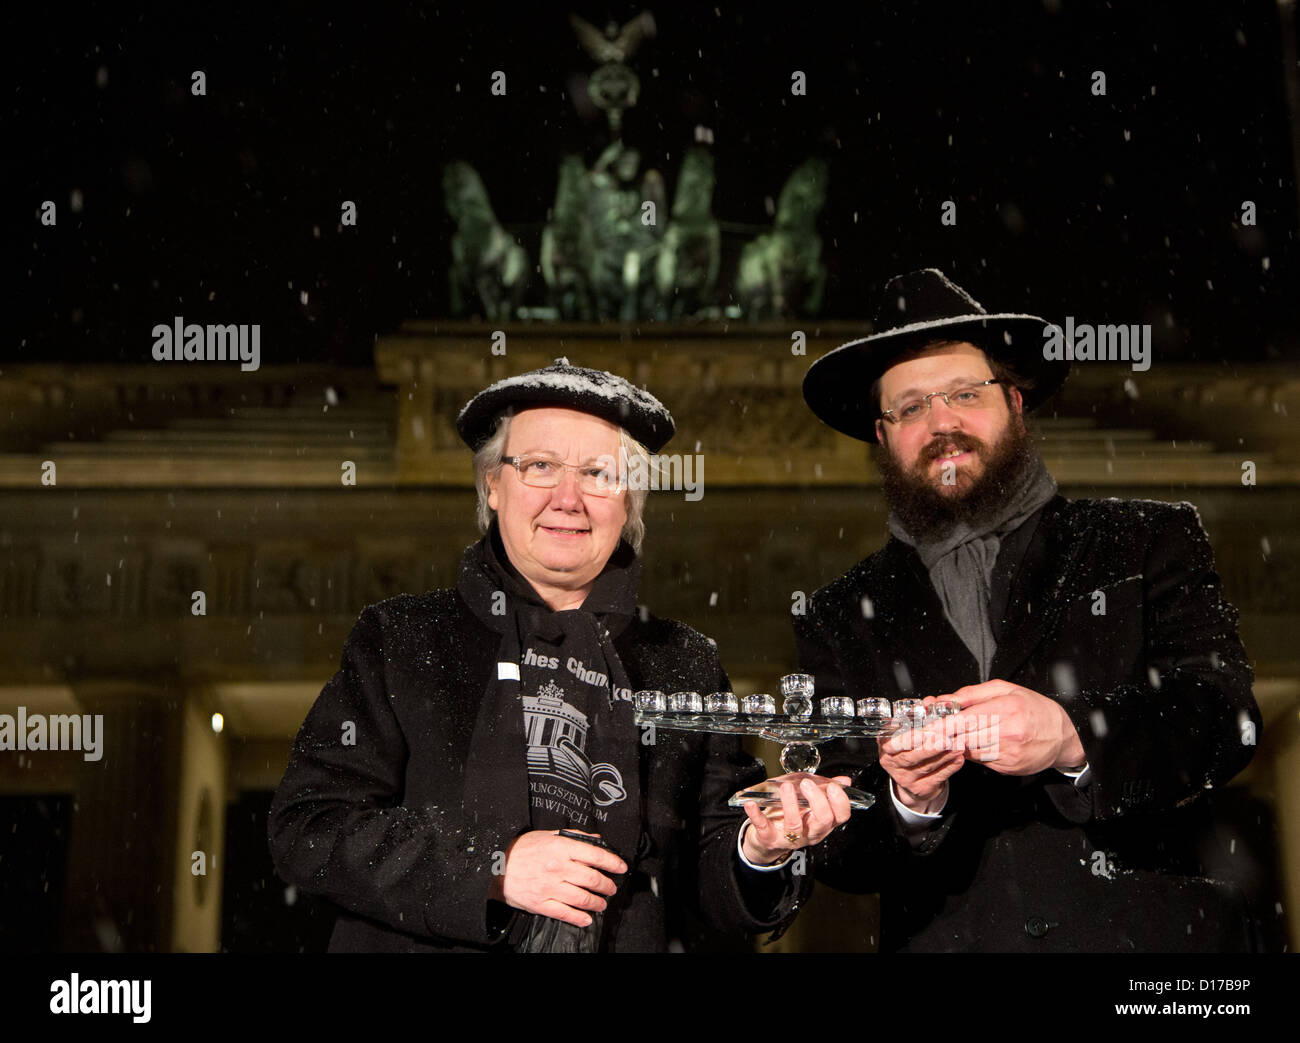 German Education and Research Minister Annette Schavan and rabbi Yehuda Teichtal hold a Hanukkah candelabrum at the Brandenburg Gate in Berlin, Germany, 09 december 2012. The Jewish holiday commemorates the rededication of the Holy Temple in Jerusalem in the 2nd century BCE. Photo: JOERG CARSTENSEN Stock Photo